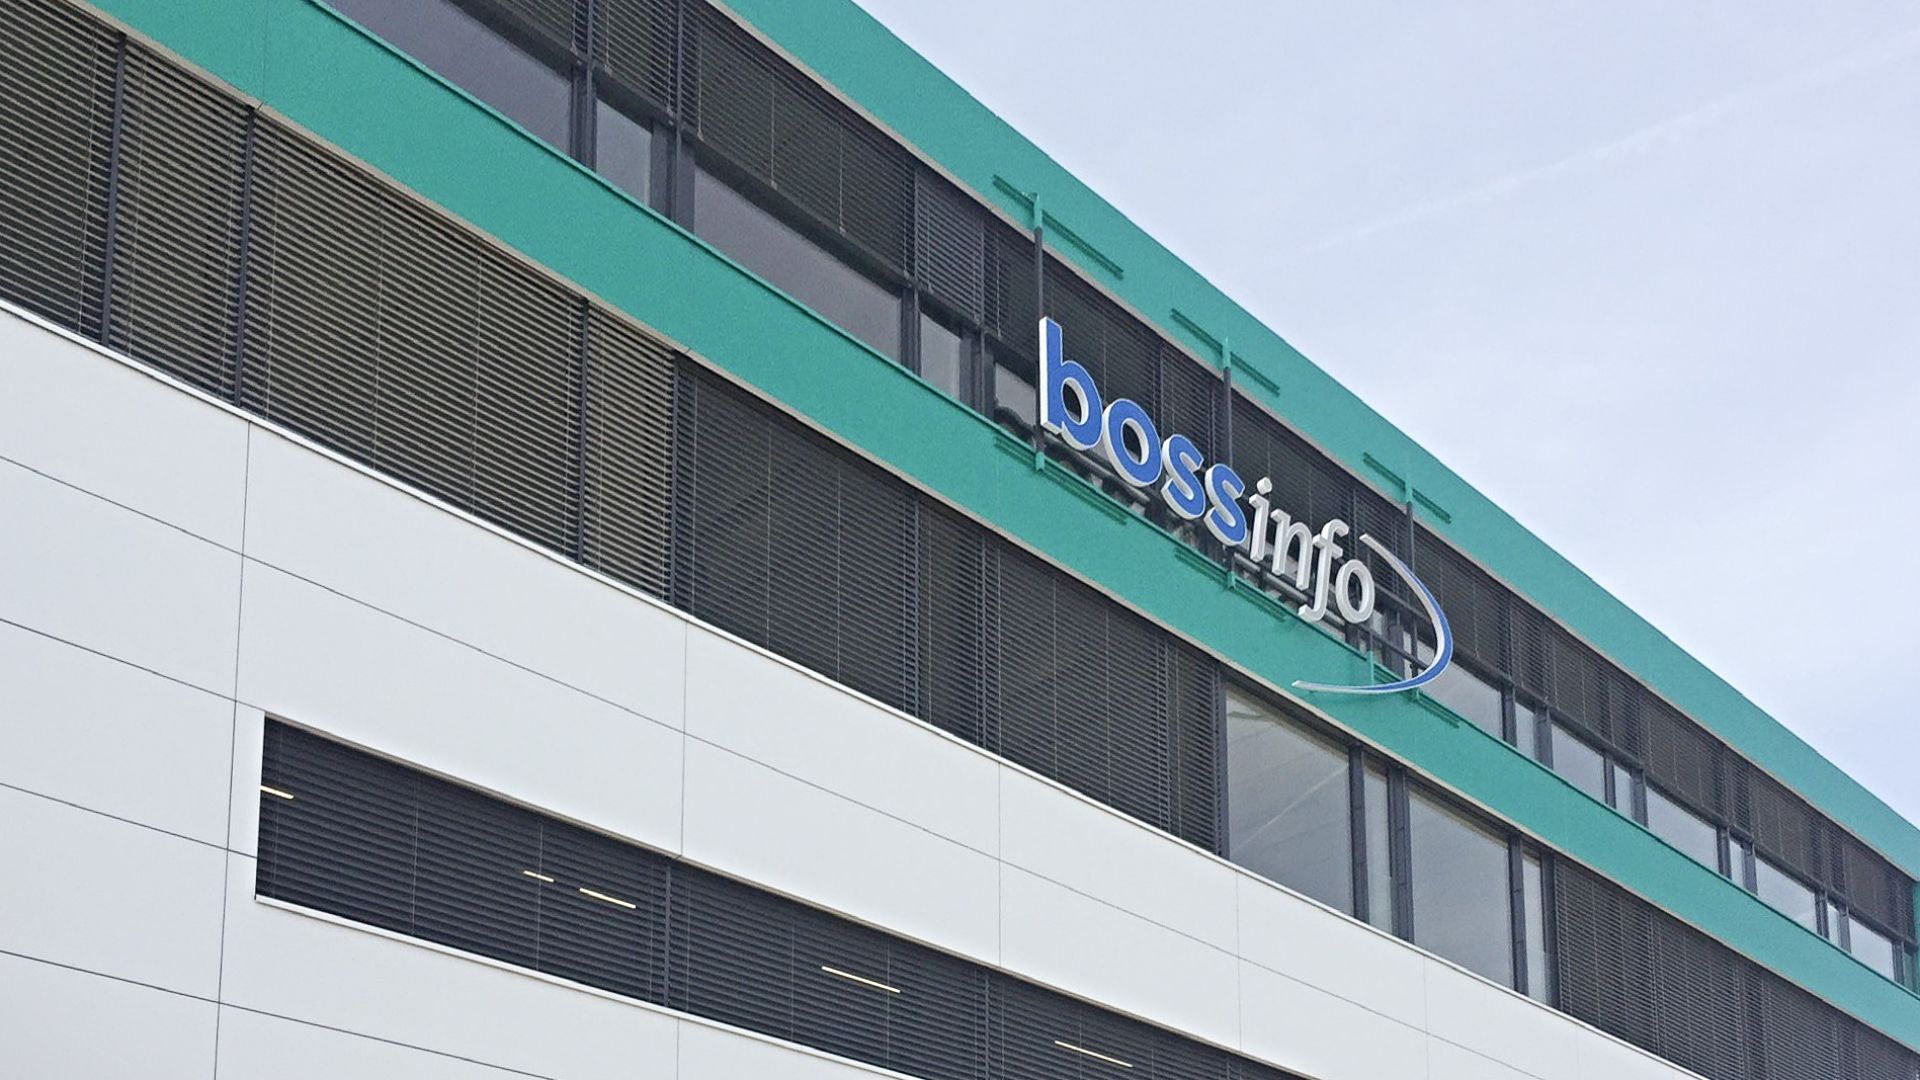 Boss Info has raised funds to support its growth strategy